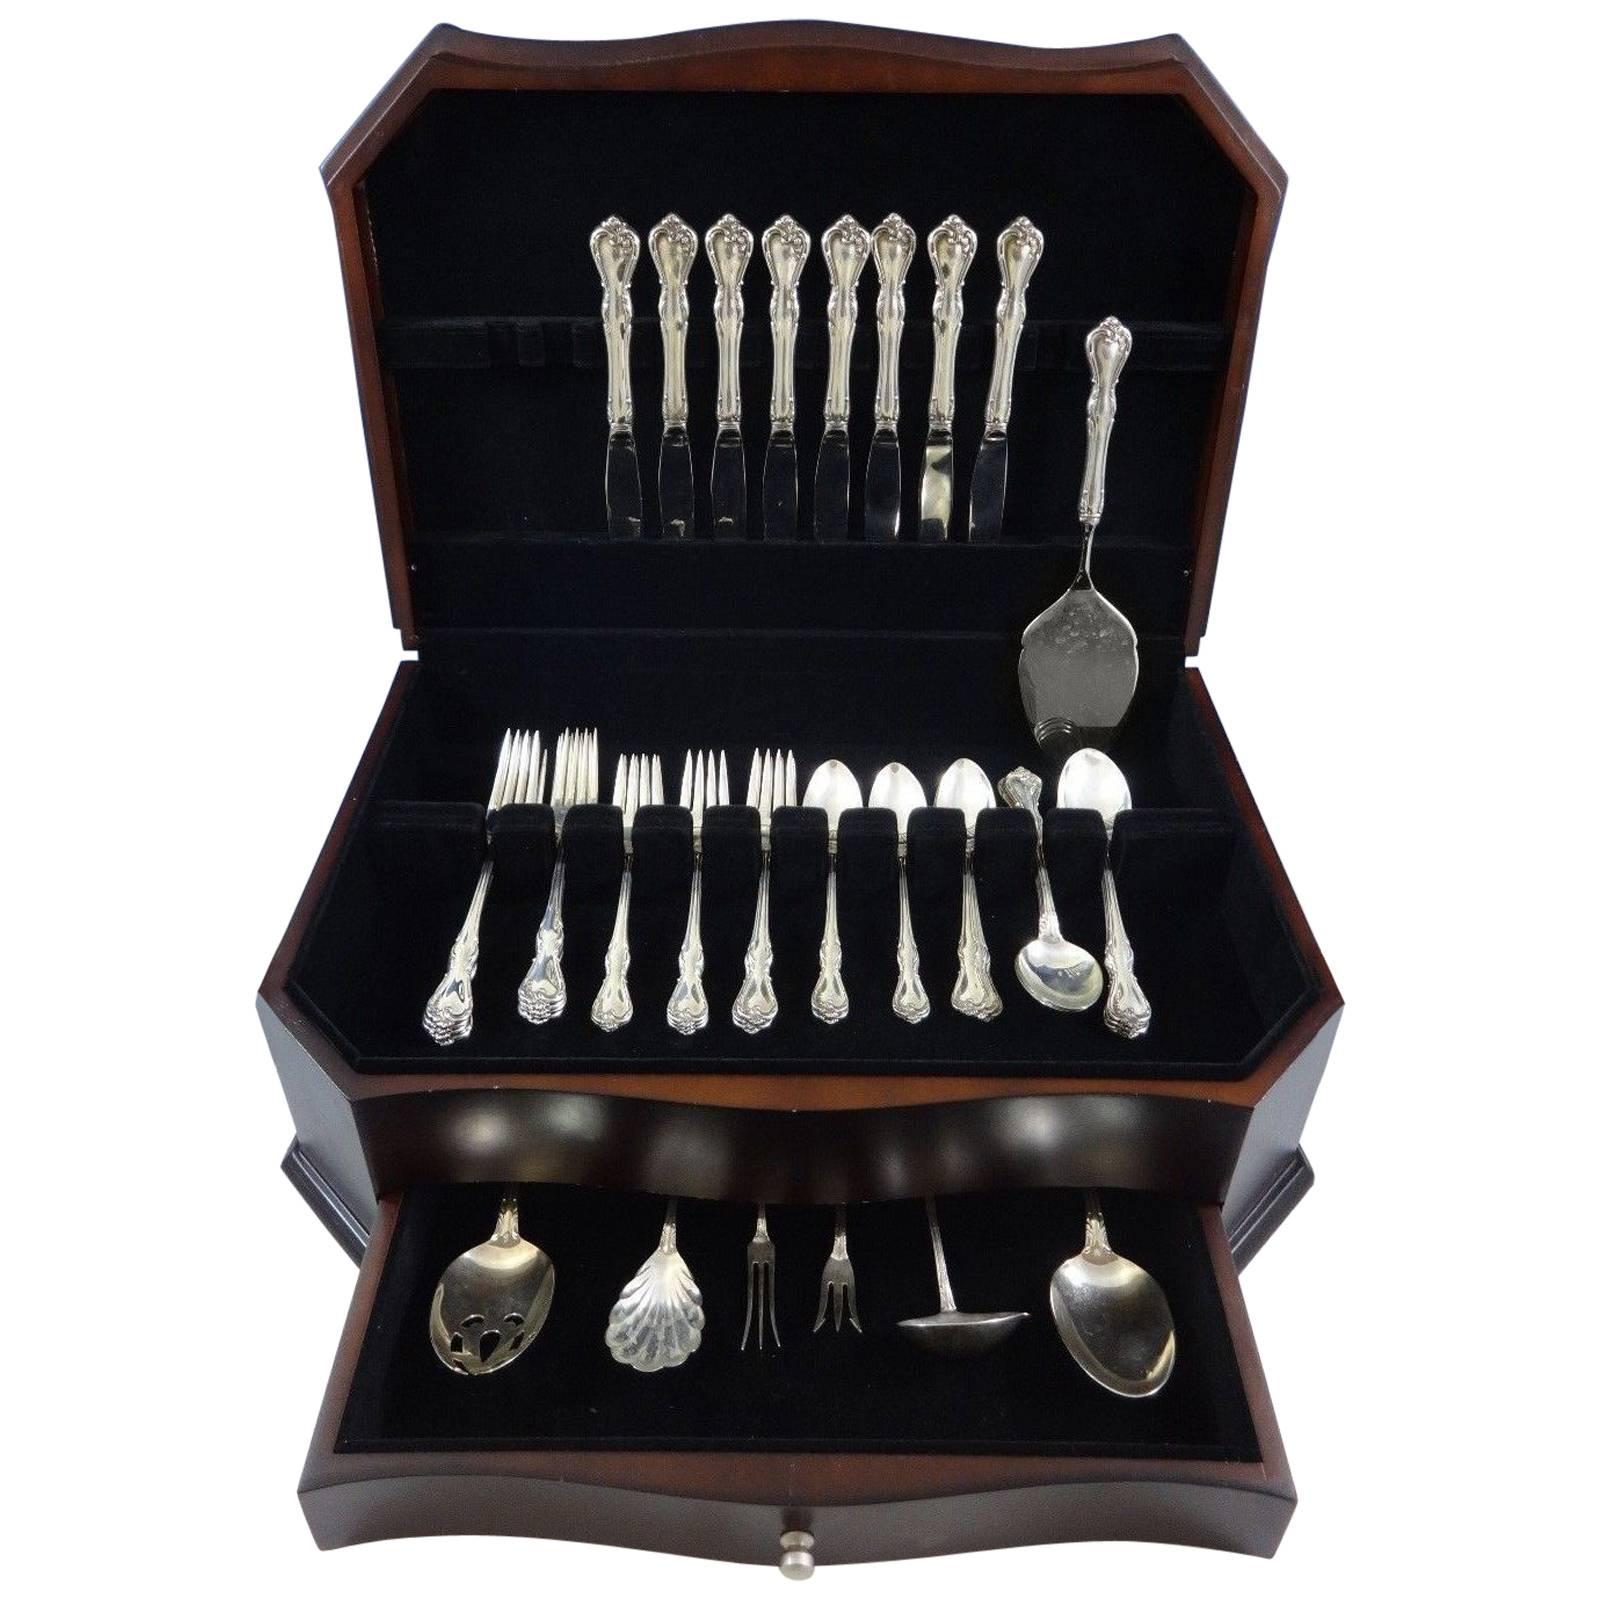 Beautiful Rose Cascade by Reed & Barton sterling silver flatware set - 47 pieces. This set includes:

Eight knives, 9